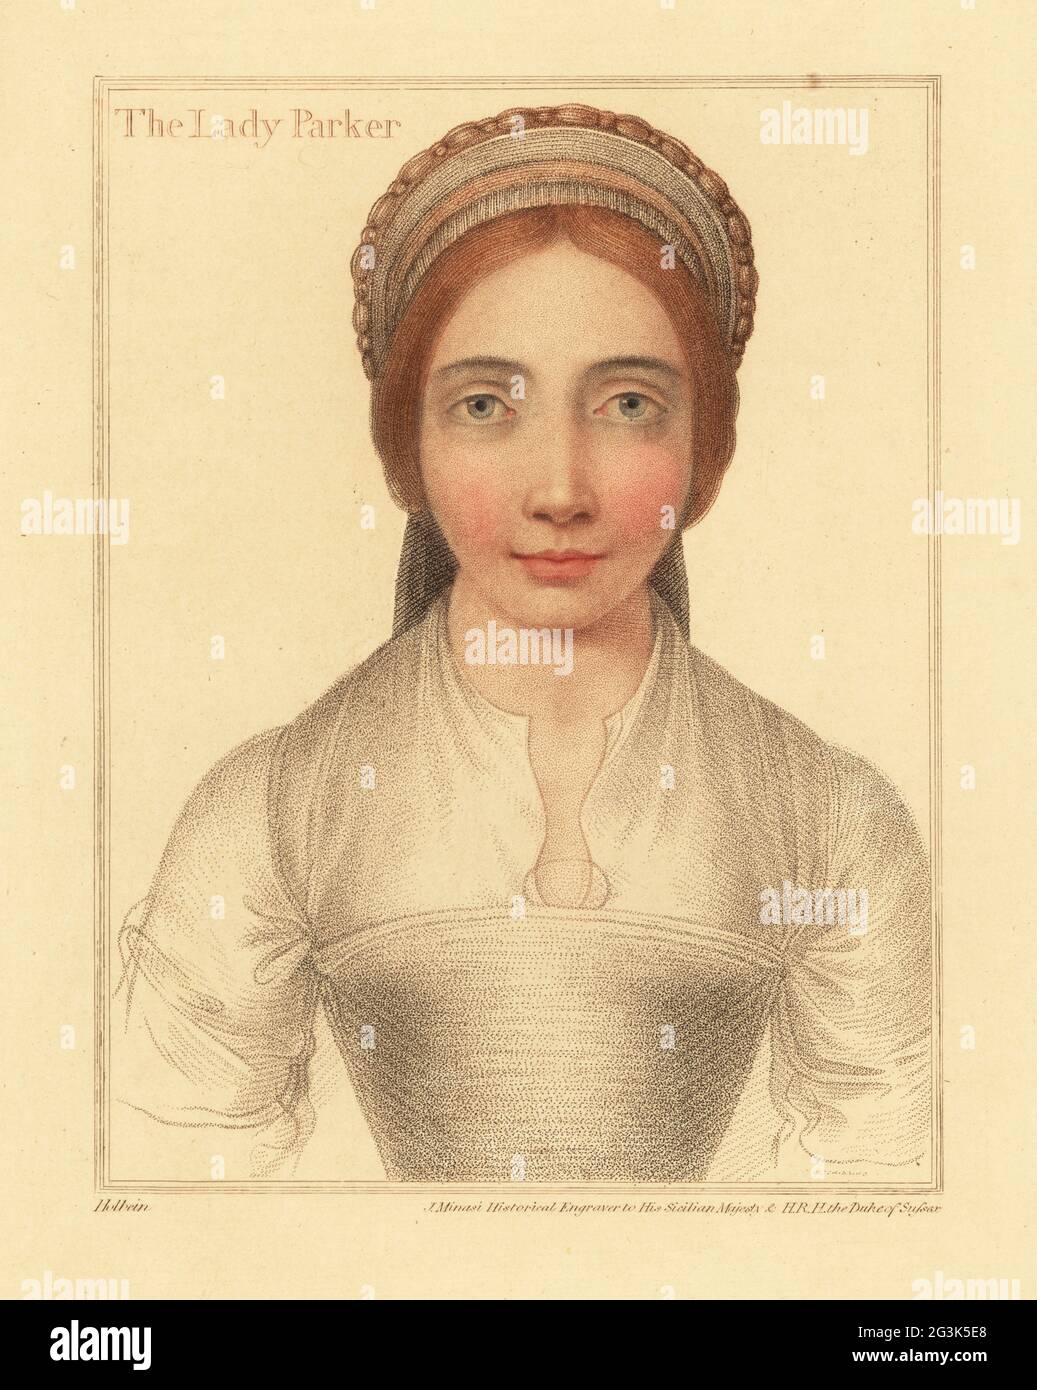 Lady Parker, wife of Sir Henry Parker. First wife Grace Newport, or second wife Elizabeth Calthrope. Also identified as Jane Boleyn (nee Parker), sister-in-law to Anne Boleyn. Handcoloured copperplate stipple engraving by James Minasi after a portrait by Hans Holbein the Younger from Imitations of Original Drawings by Hans Holbein, John Chamberlaine, London, 1812. Stock Photo